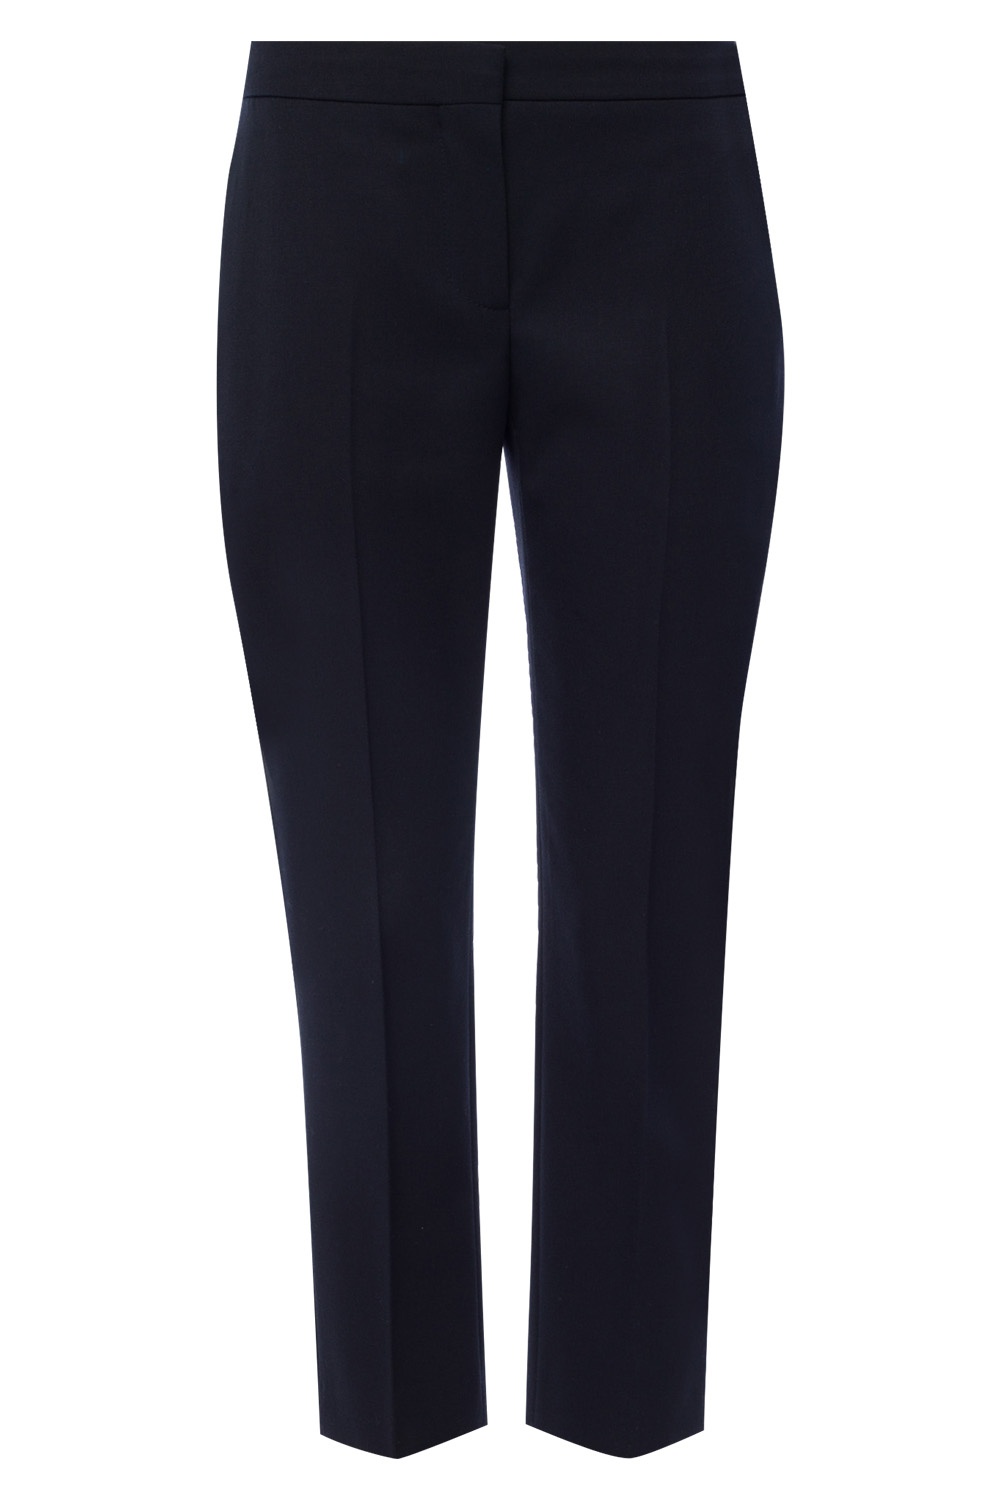 Olsen Lisa Navy Cropped Trousers  Claytons Quality Clothing